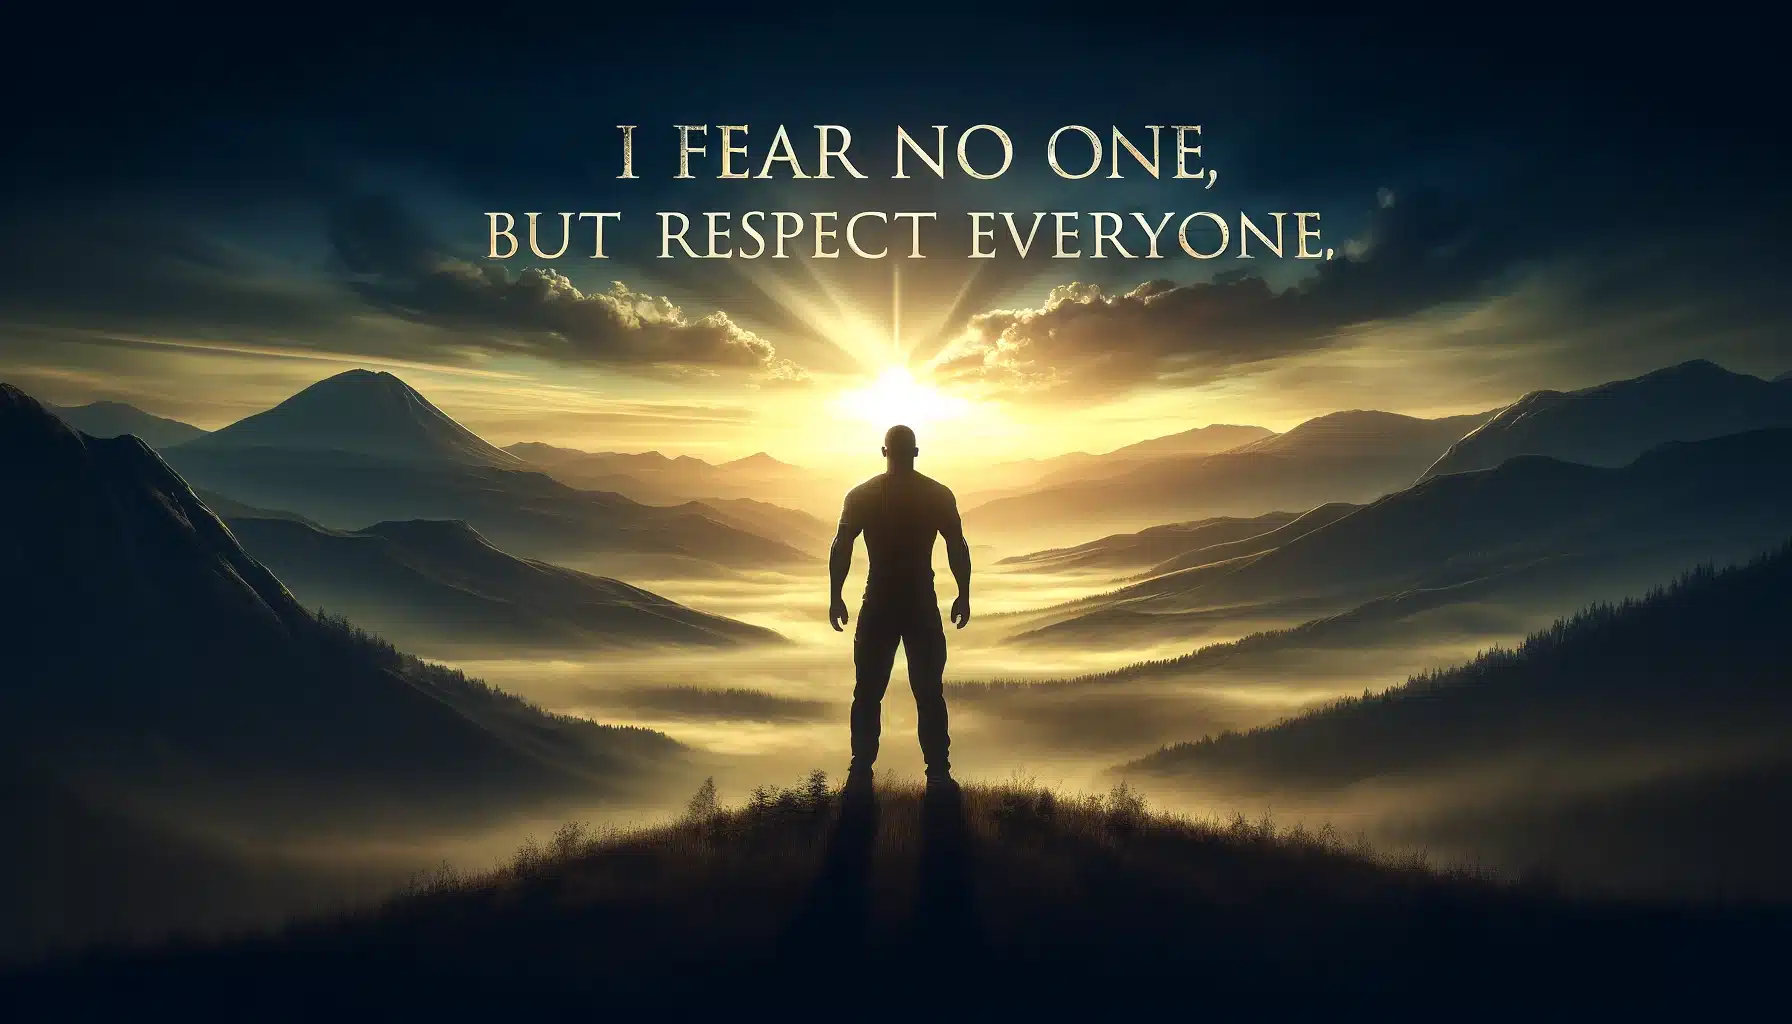 I Fear No One, But Respect Everyone. – Tymoff